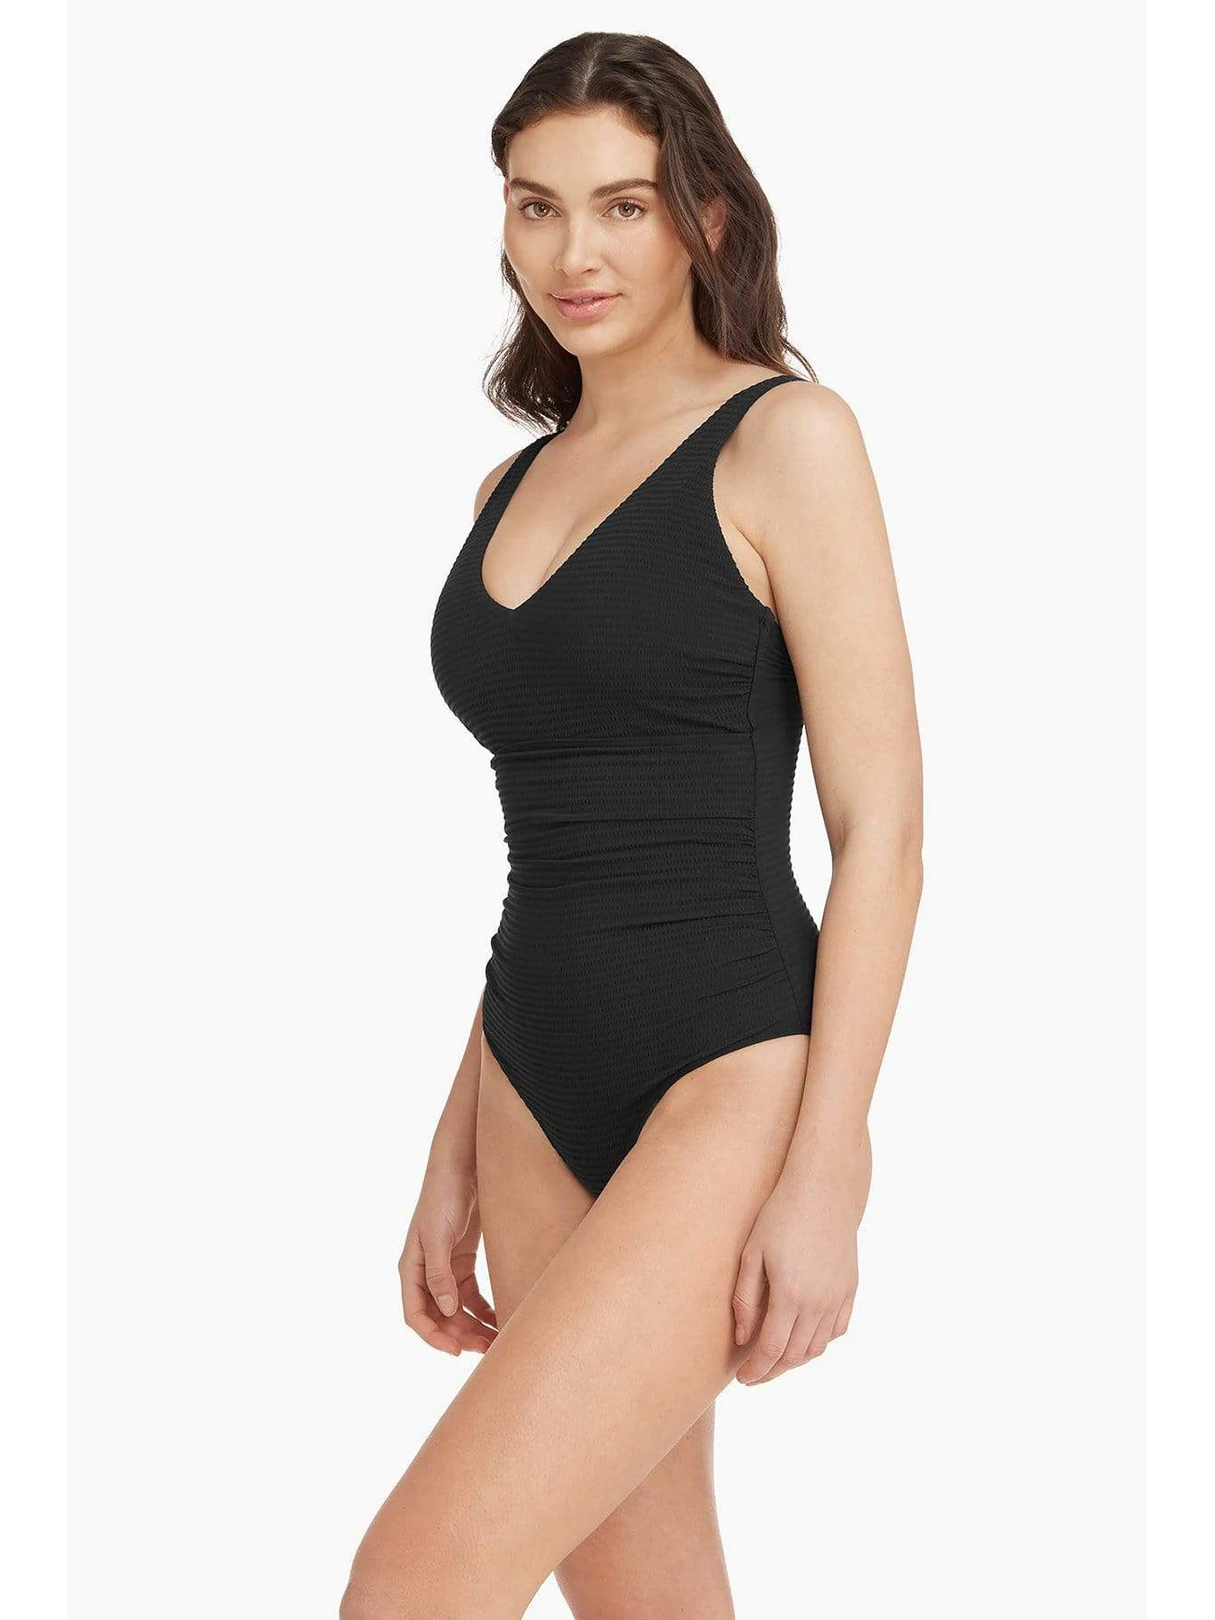 Sea Level Messina D/DD Cup One Piece in Black